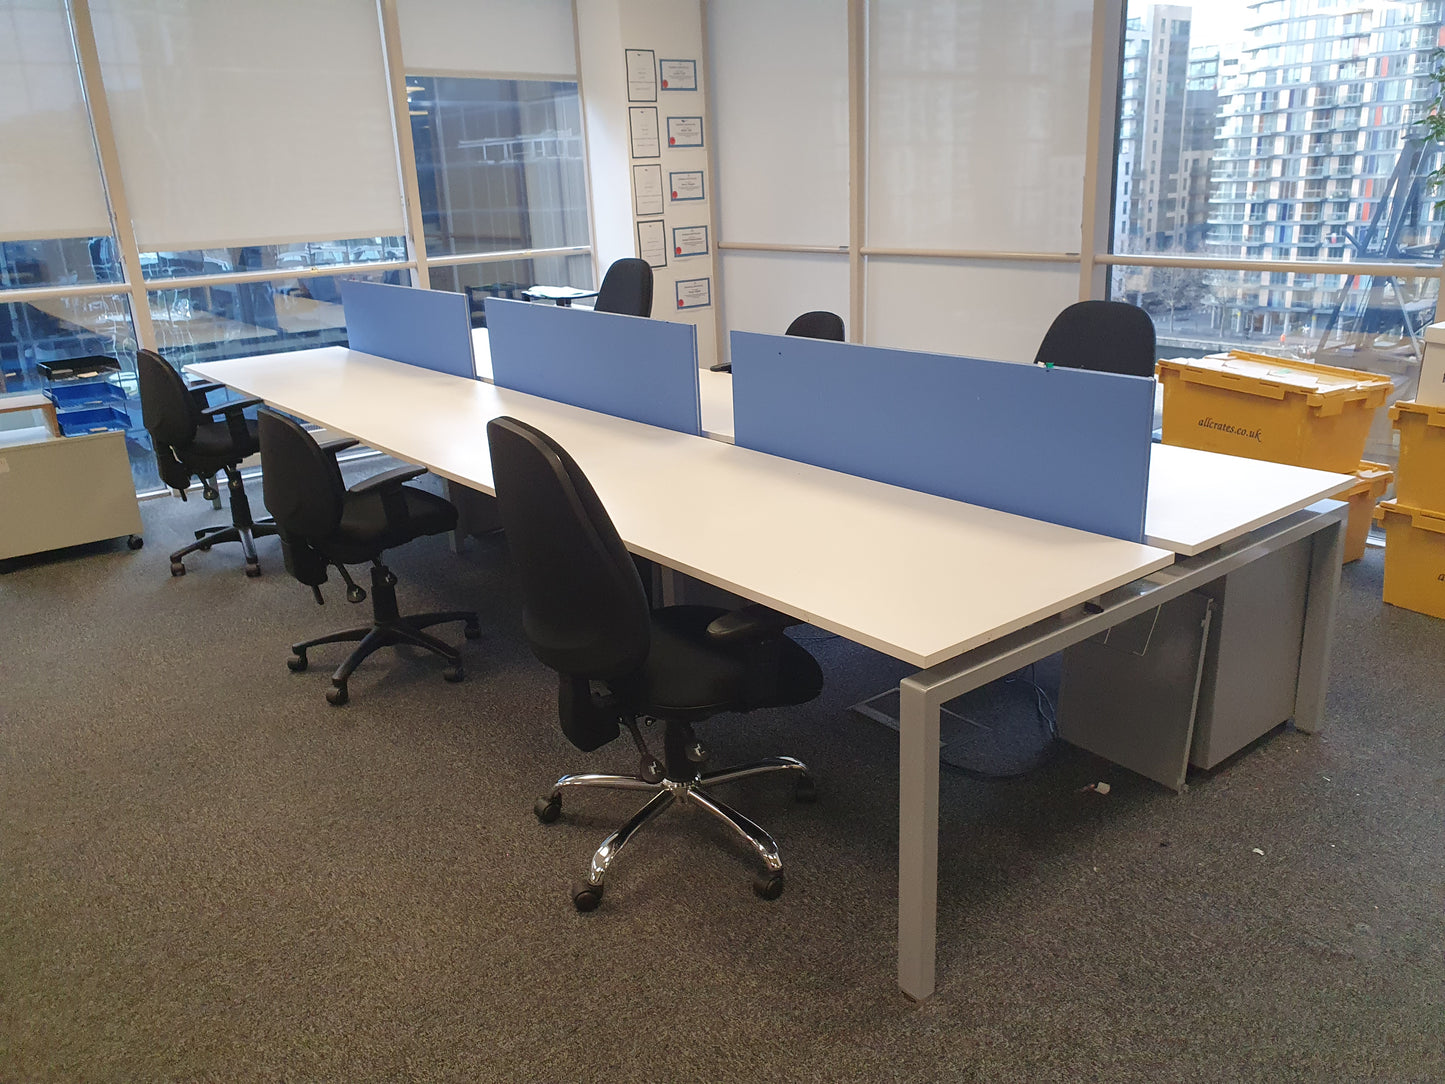 Bank of six office desks in white and six black chairs